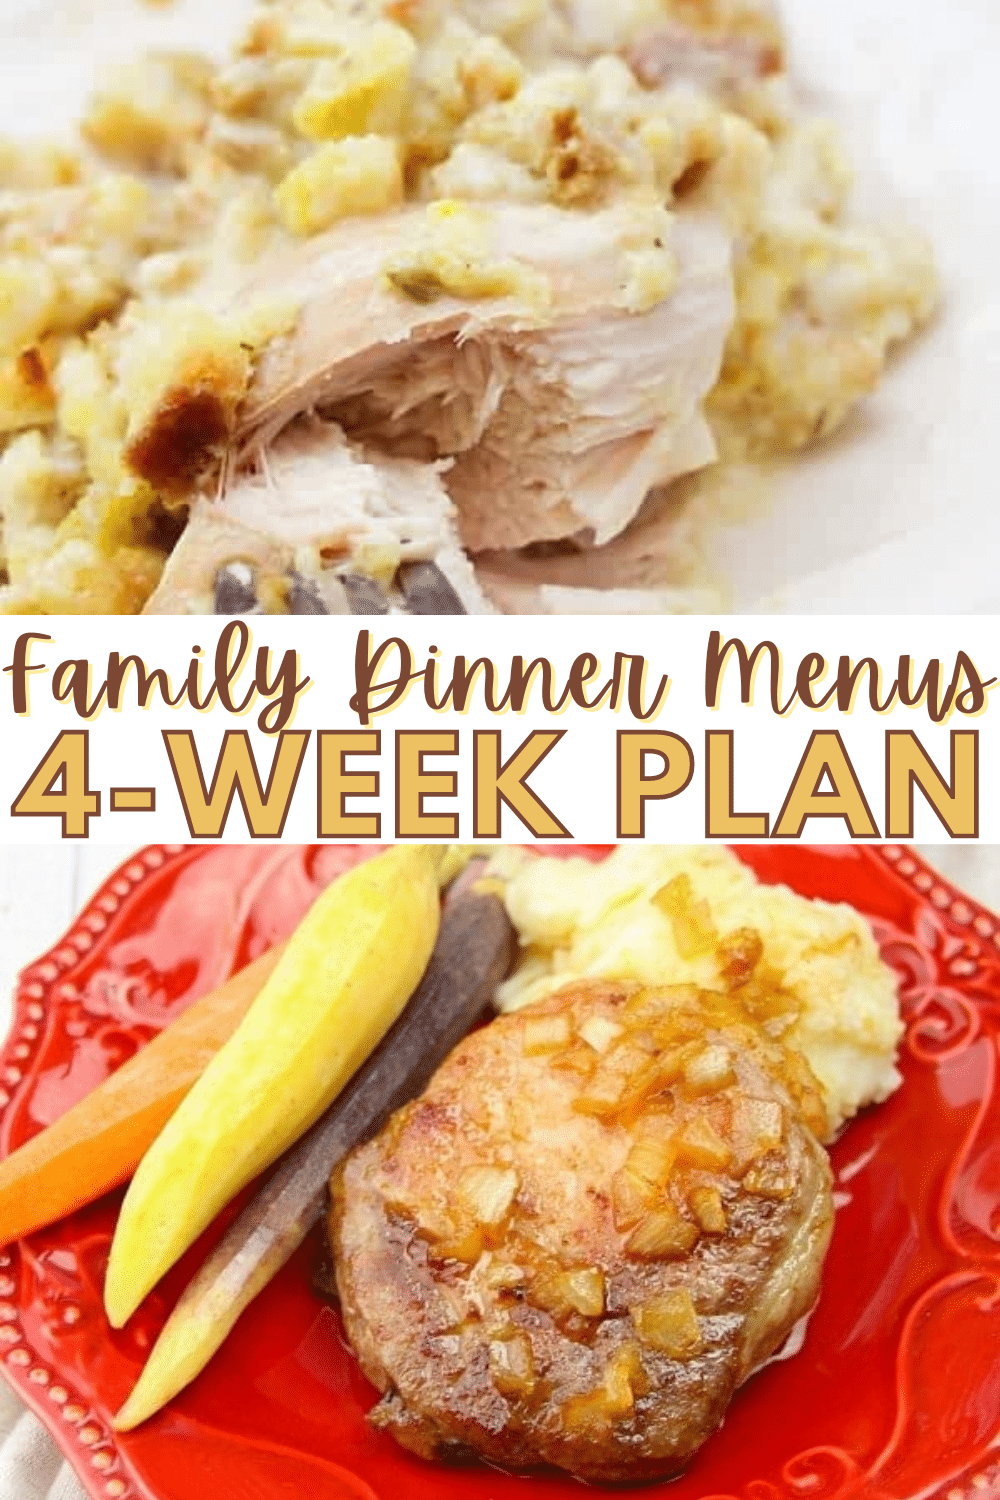 4 full weeks of dinner ideas that are family-friendly and kid-approved. Plus, helpful tips to put meal planning and grocery shopping on autopilot so this dreaded chore is one that will only take seconds to do! #dinnerideas #mealplan #familyfriendlyrecipes via @wondermomwannab